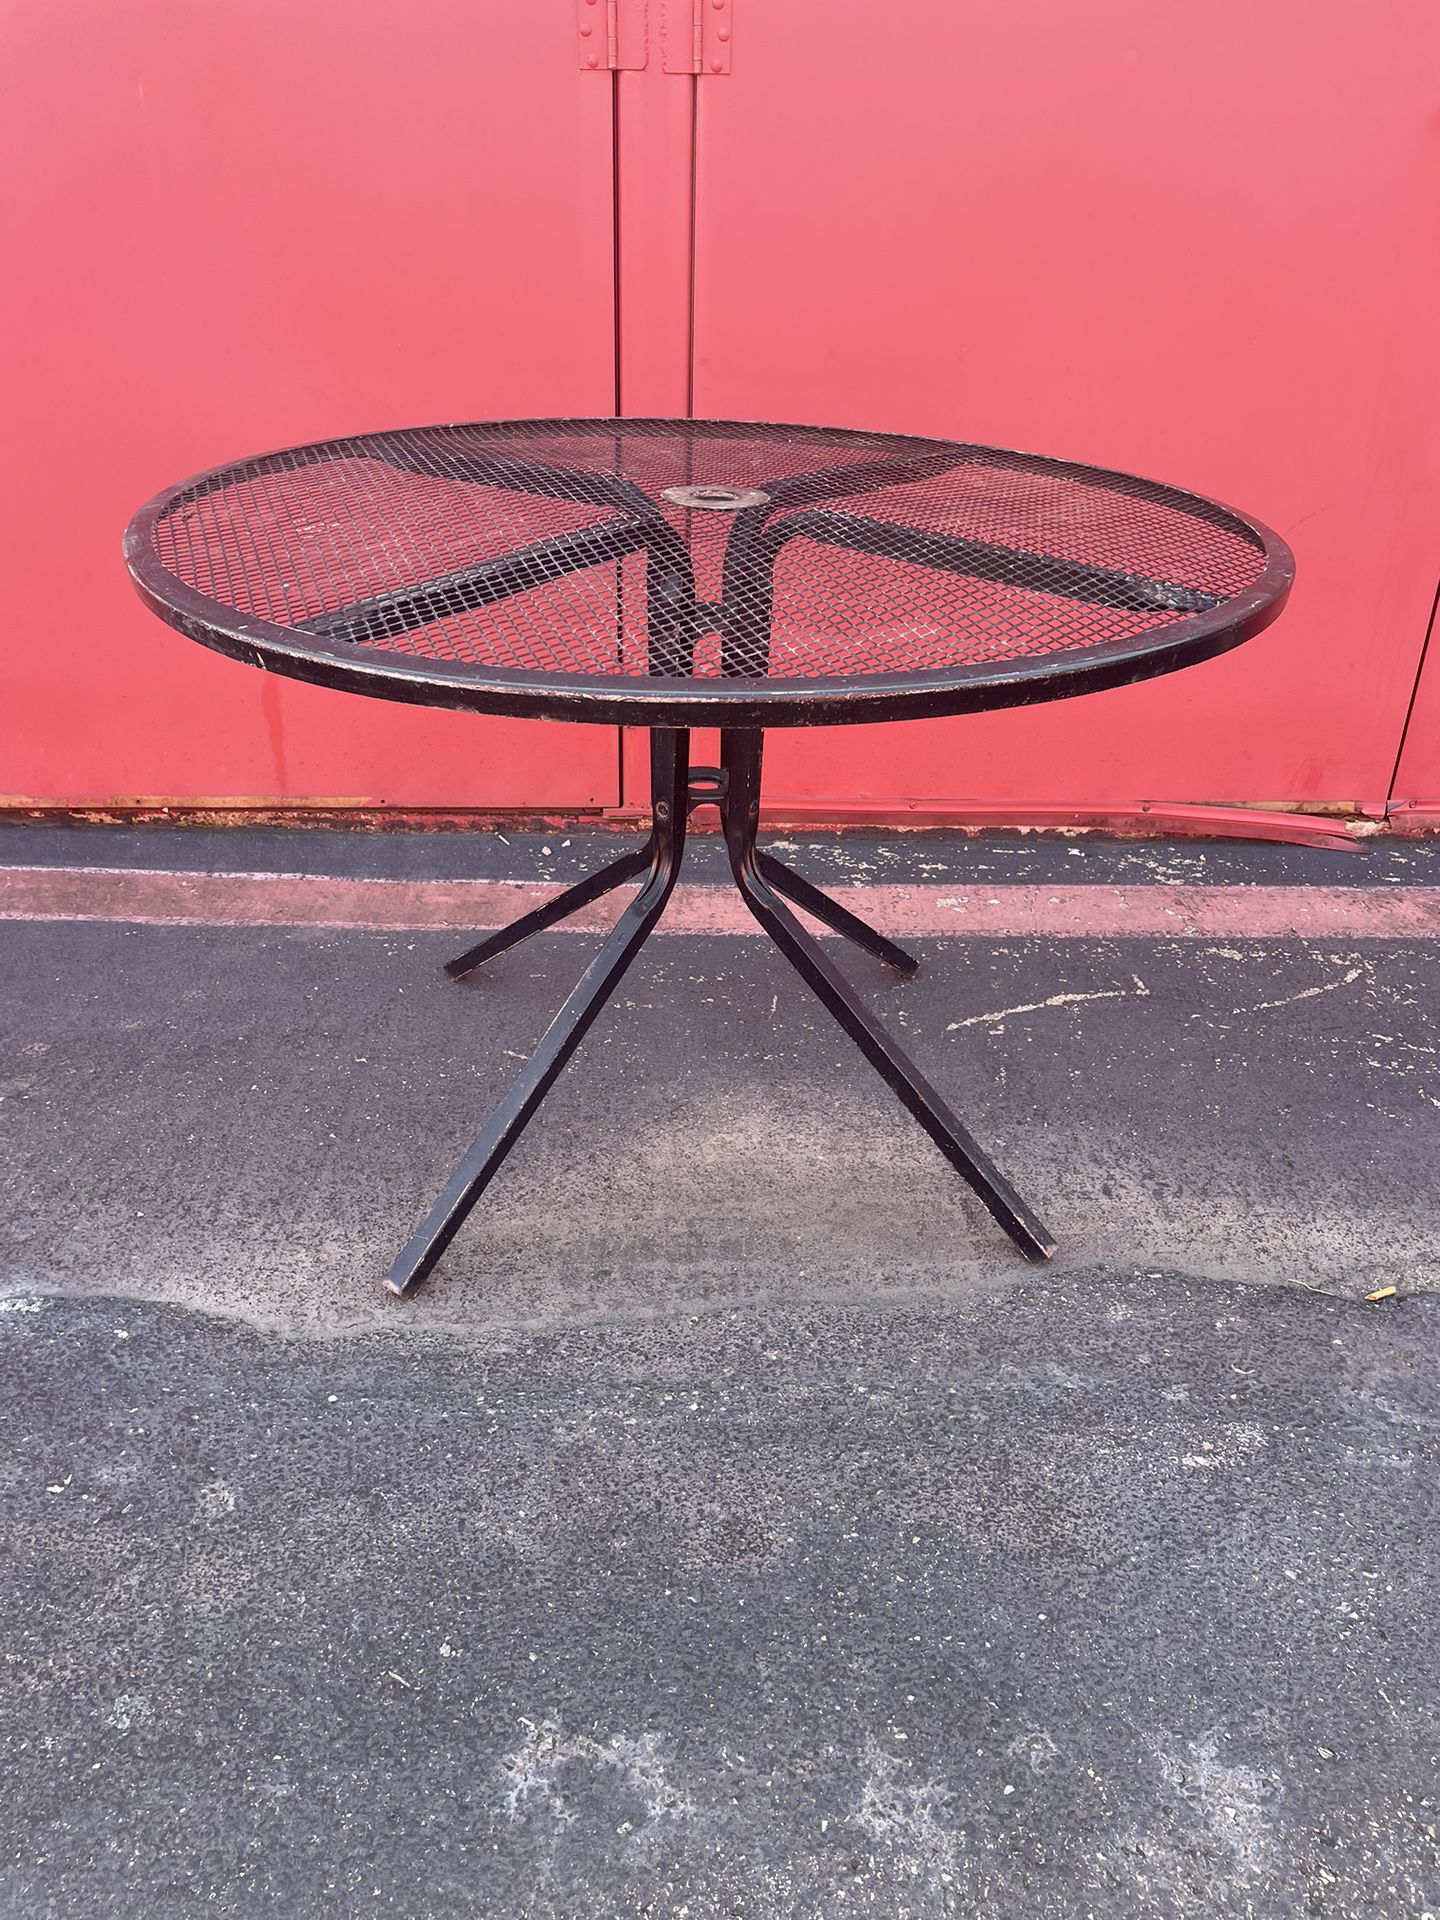 1 Metal wrought iron round dining patio lawn table only. No chairs